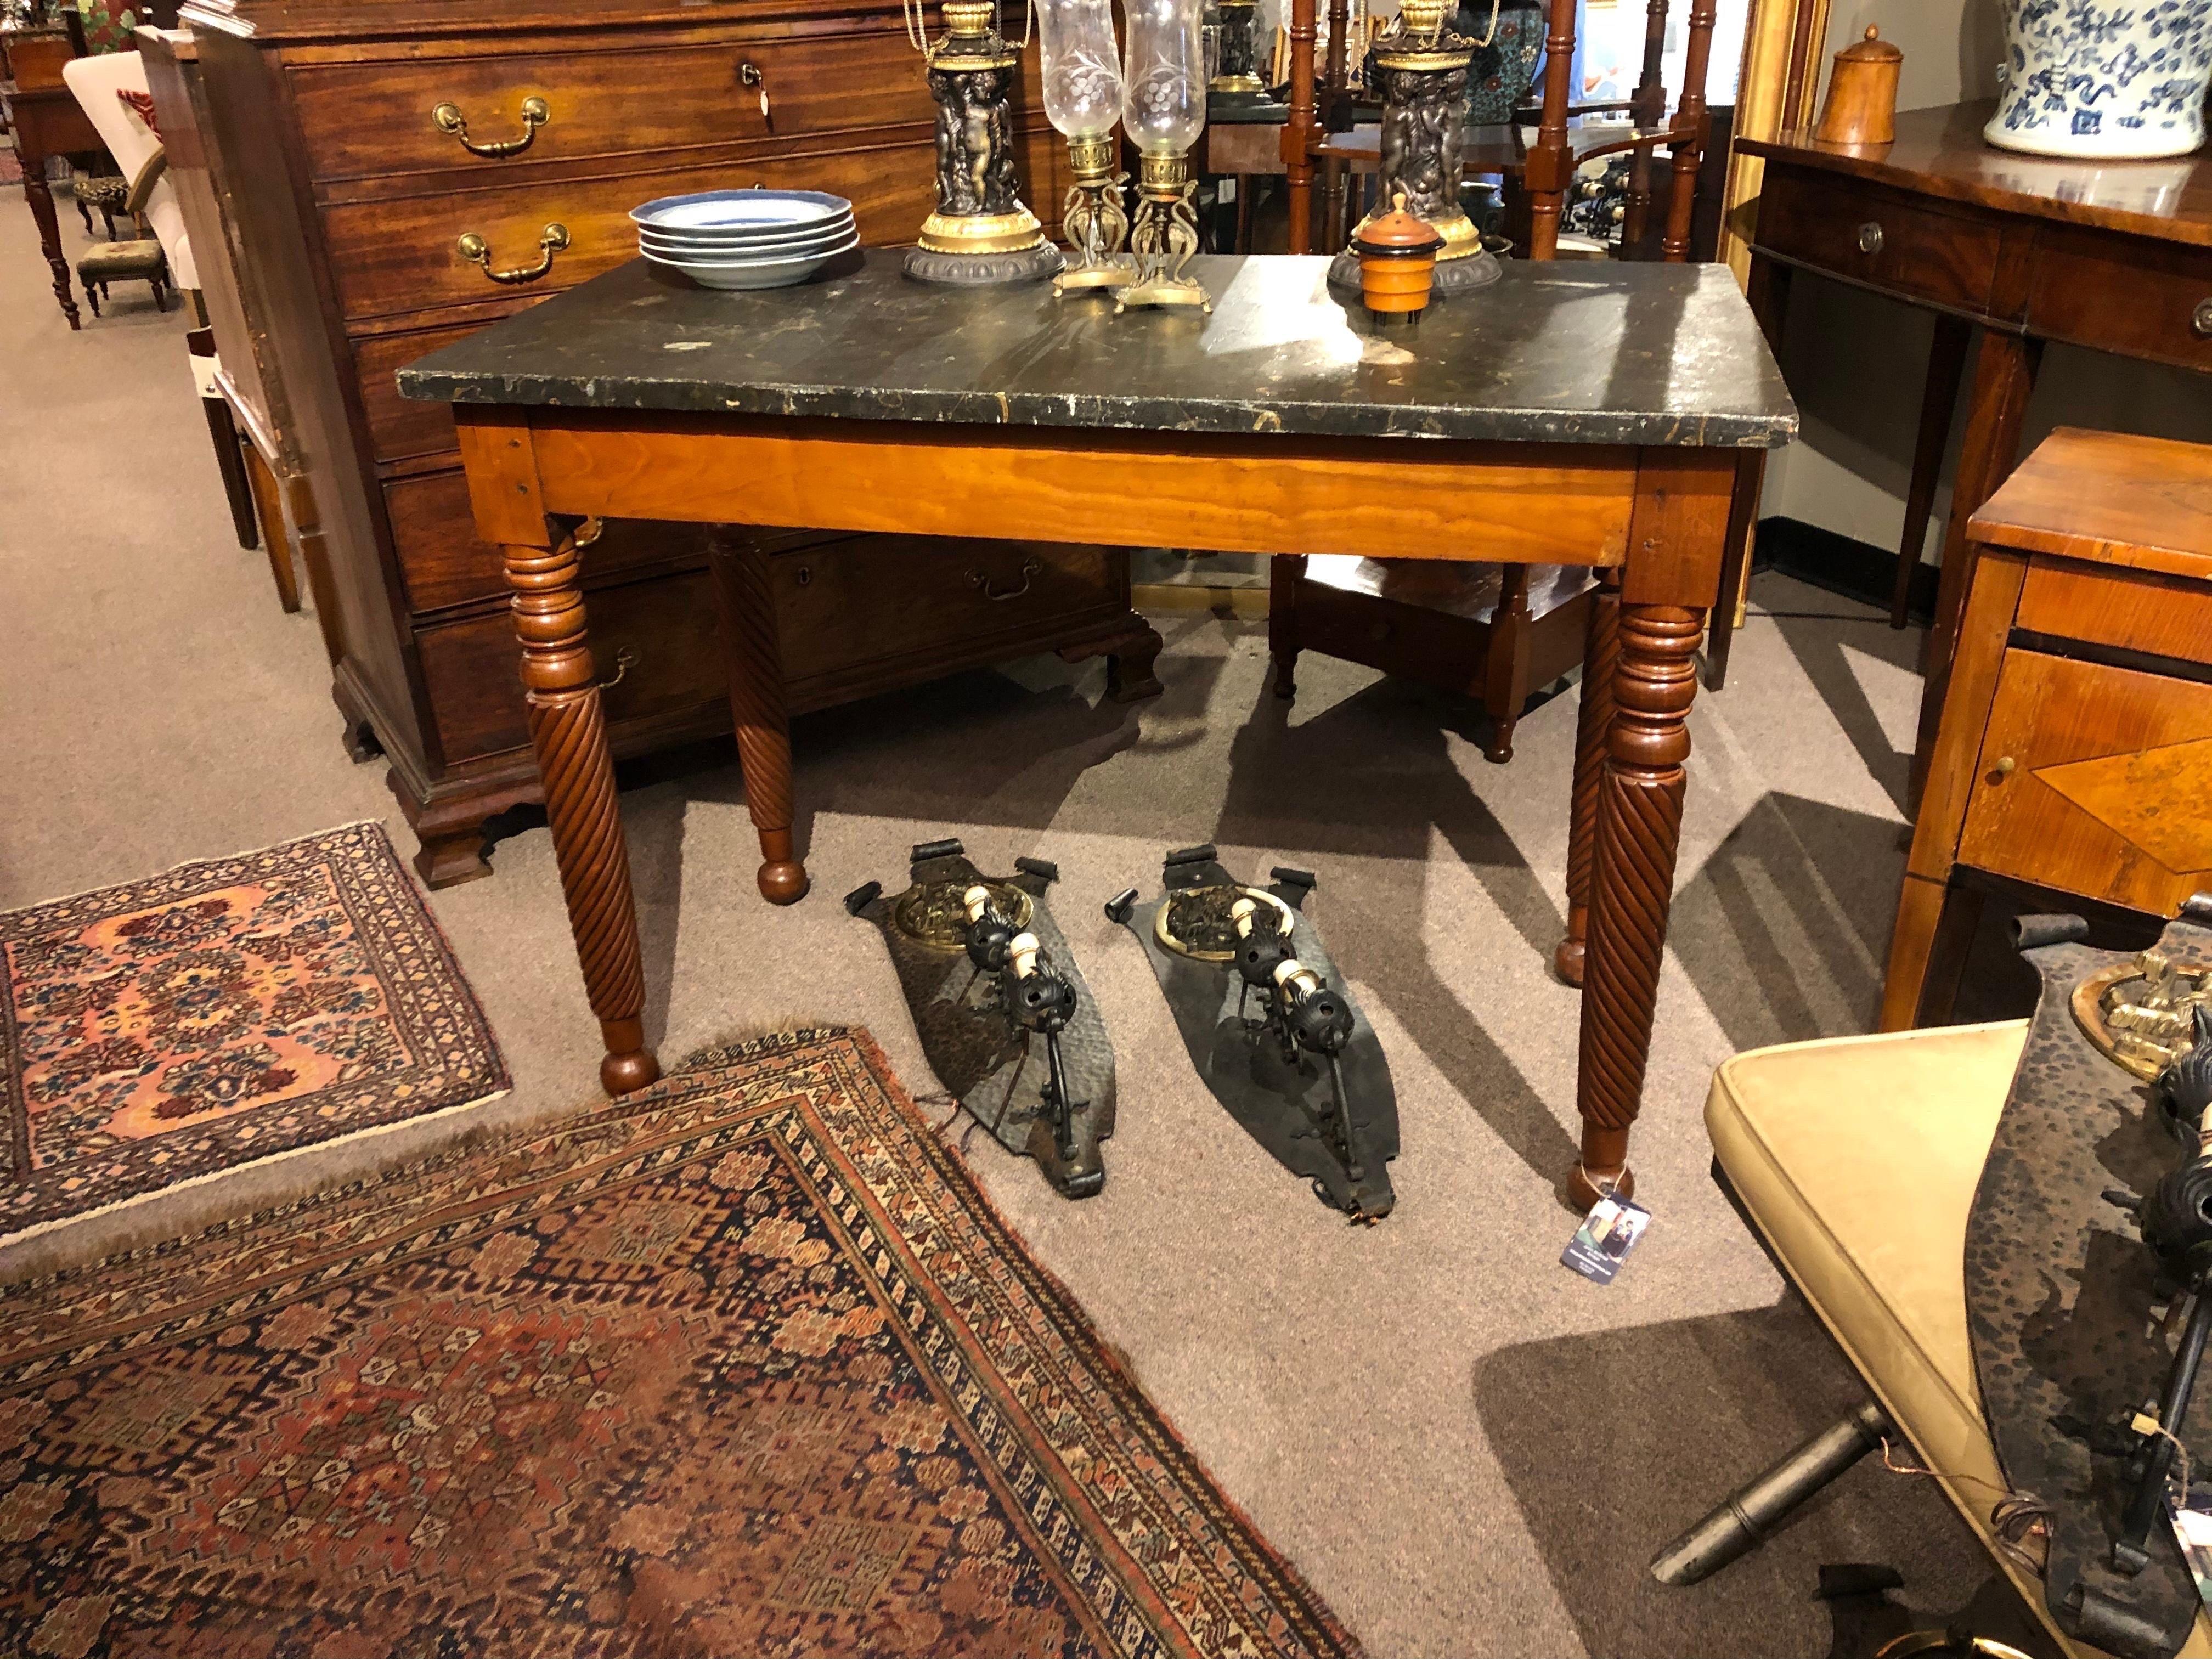 Great 19th century English Regency slate top mahogany mixing table. Base is double pinned construction with hand carved spirals between ring turnings and ball feet. Top is hand chiseled slate with an incredible faux painted finish. Wonderful piece-